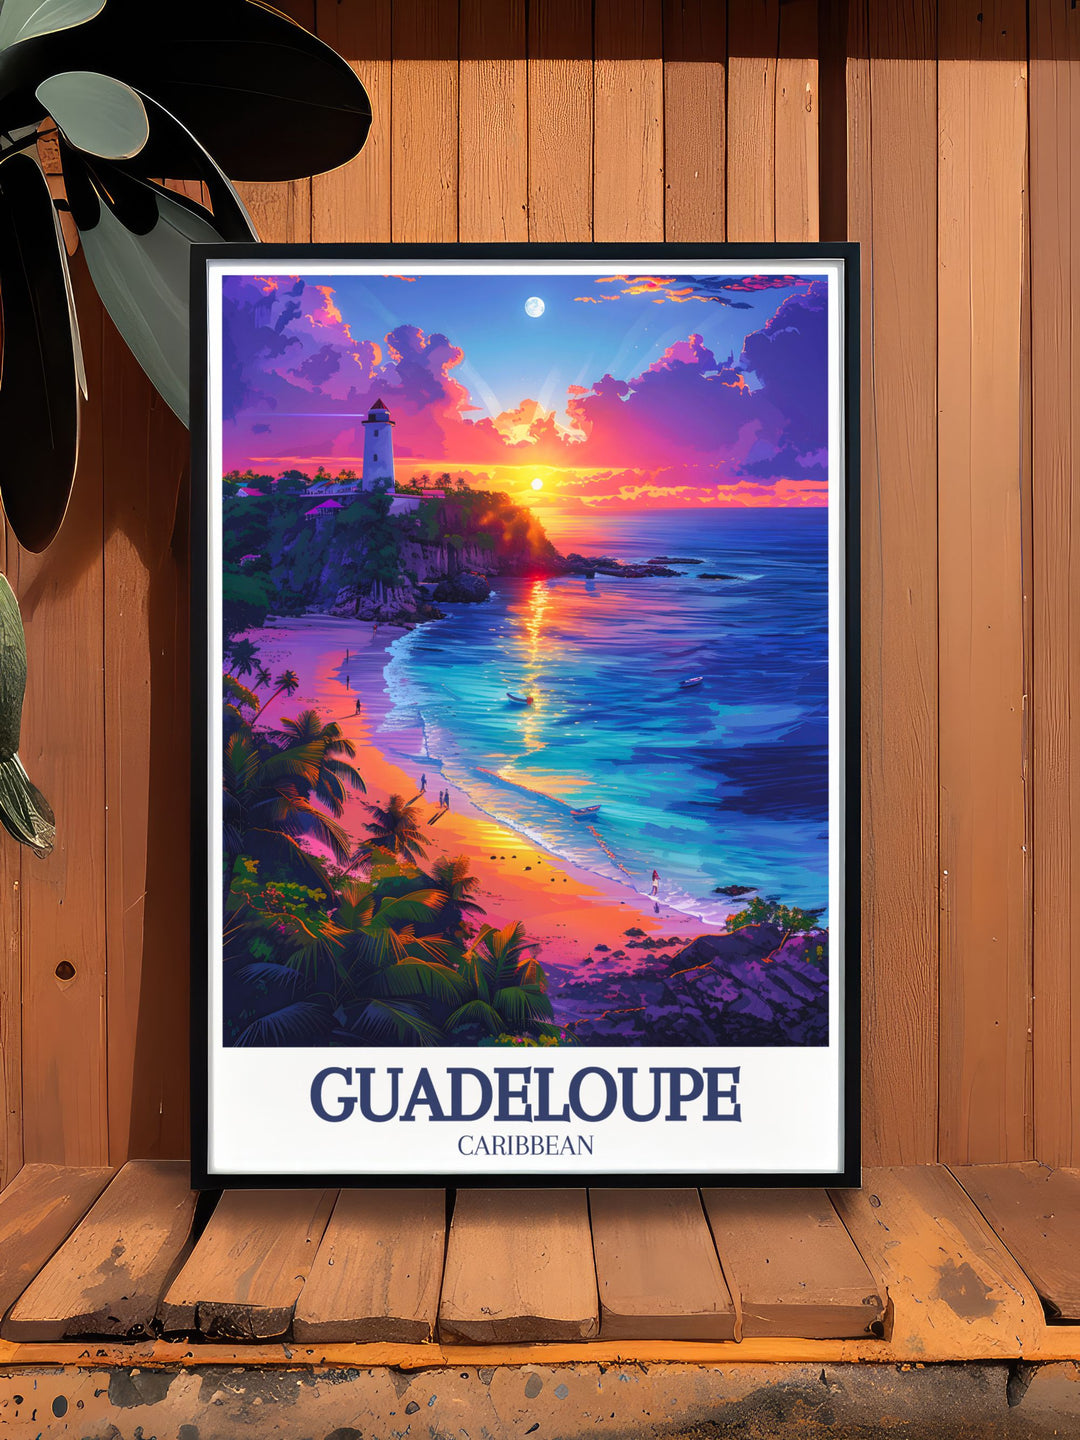 Showcasing the cultural and historical landmarks of Guadeloupe, this travel poster offers a glimpse into the islands rich heritage. Ideal for history enthusiasts, this artwork brings a piece of the Caribbeans past into your home.